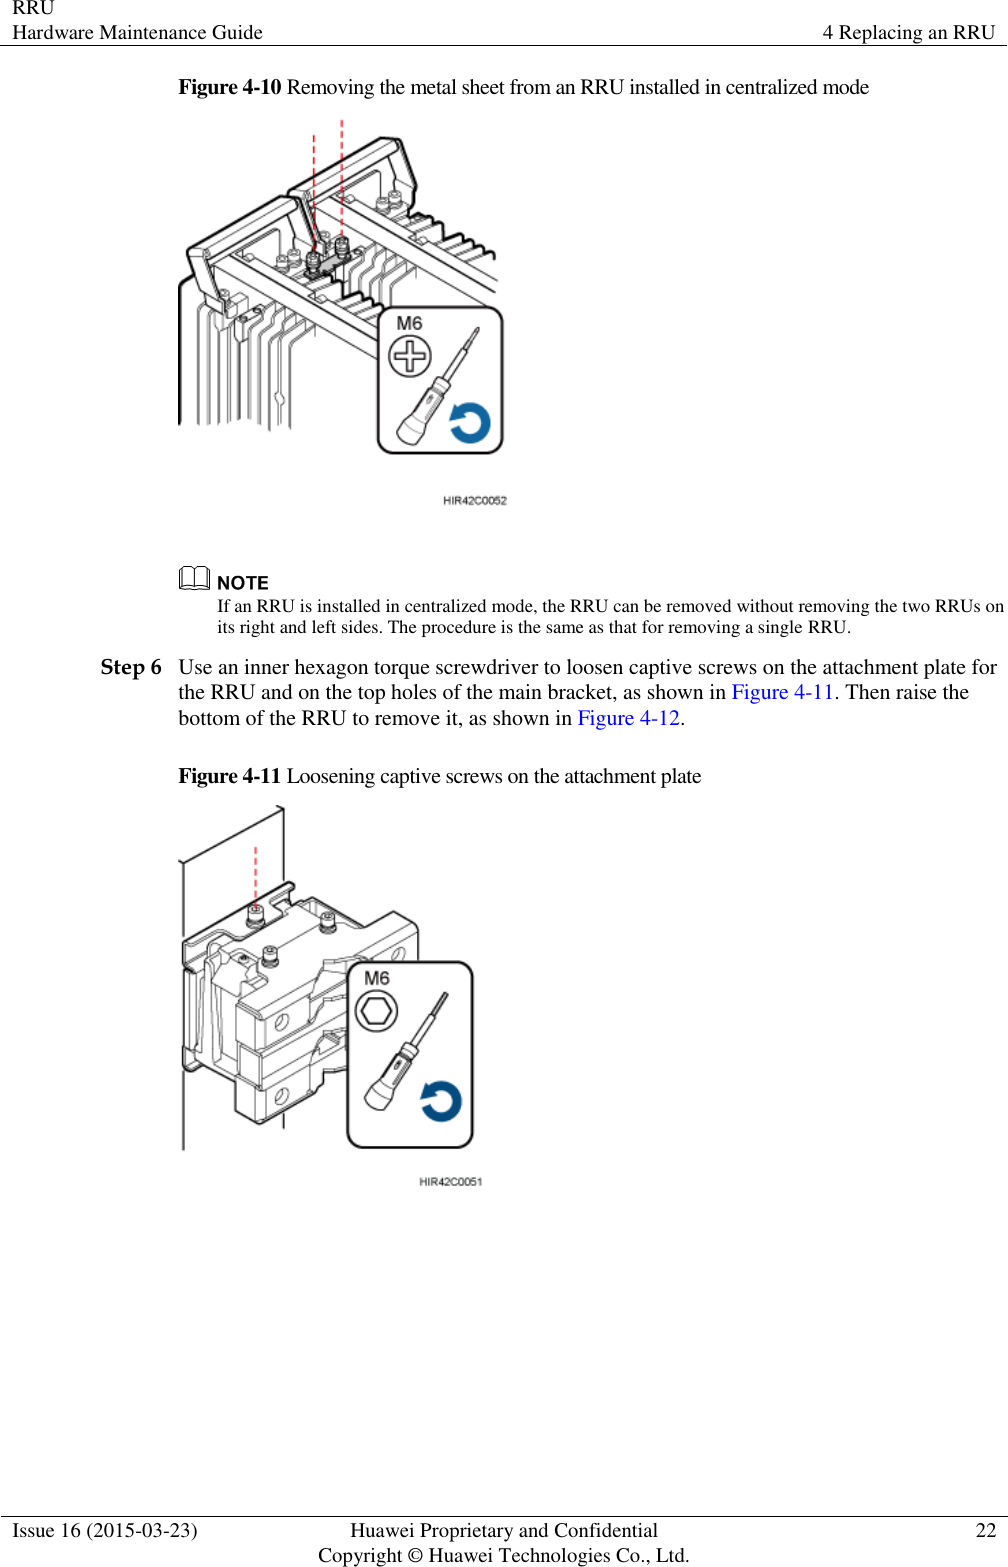 RRU Hardware Maintenance Guide 4 Replacing an RRU  Issue 16 (2015-03-23) Huawei Proprietary and Confidential                                     Copyright © Huawei Technologies Co., Ltd. 22  Figure 4-10 Removing the metal sheet from an RRU installed in centralized mode    If an RRU is installed in centralized mode, the RRU can be removed without removing the two RRUs on its right and left sides. The procedure is the same as that for removing a single RRU. Step 6 Use an inner hexagon torque screwdriver to loosen captive screws on the attachment plate for the RRU and on the top holes of the main bracket, as shown in Figure 4-11. Then raise the bottom of the RRU to remove it, as shown in Figure 4-12. Figure 4-11 Loosening captive screws on the attachment plate   